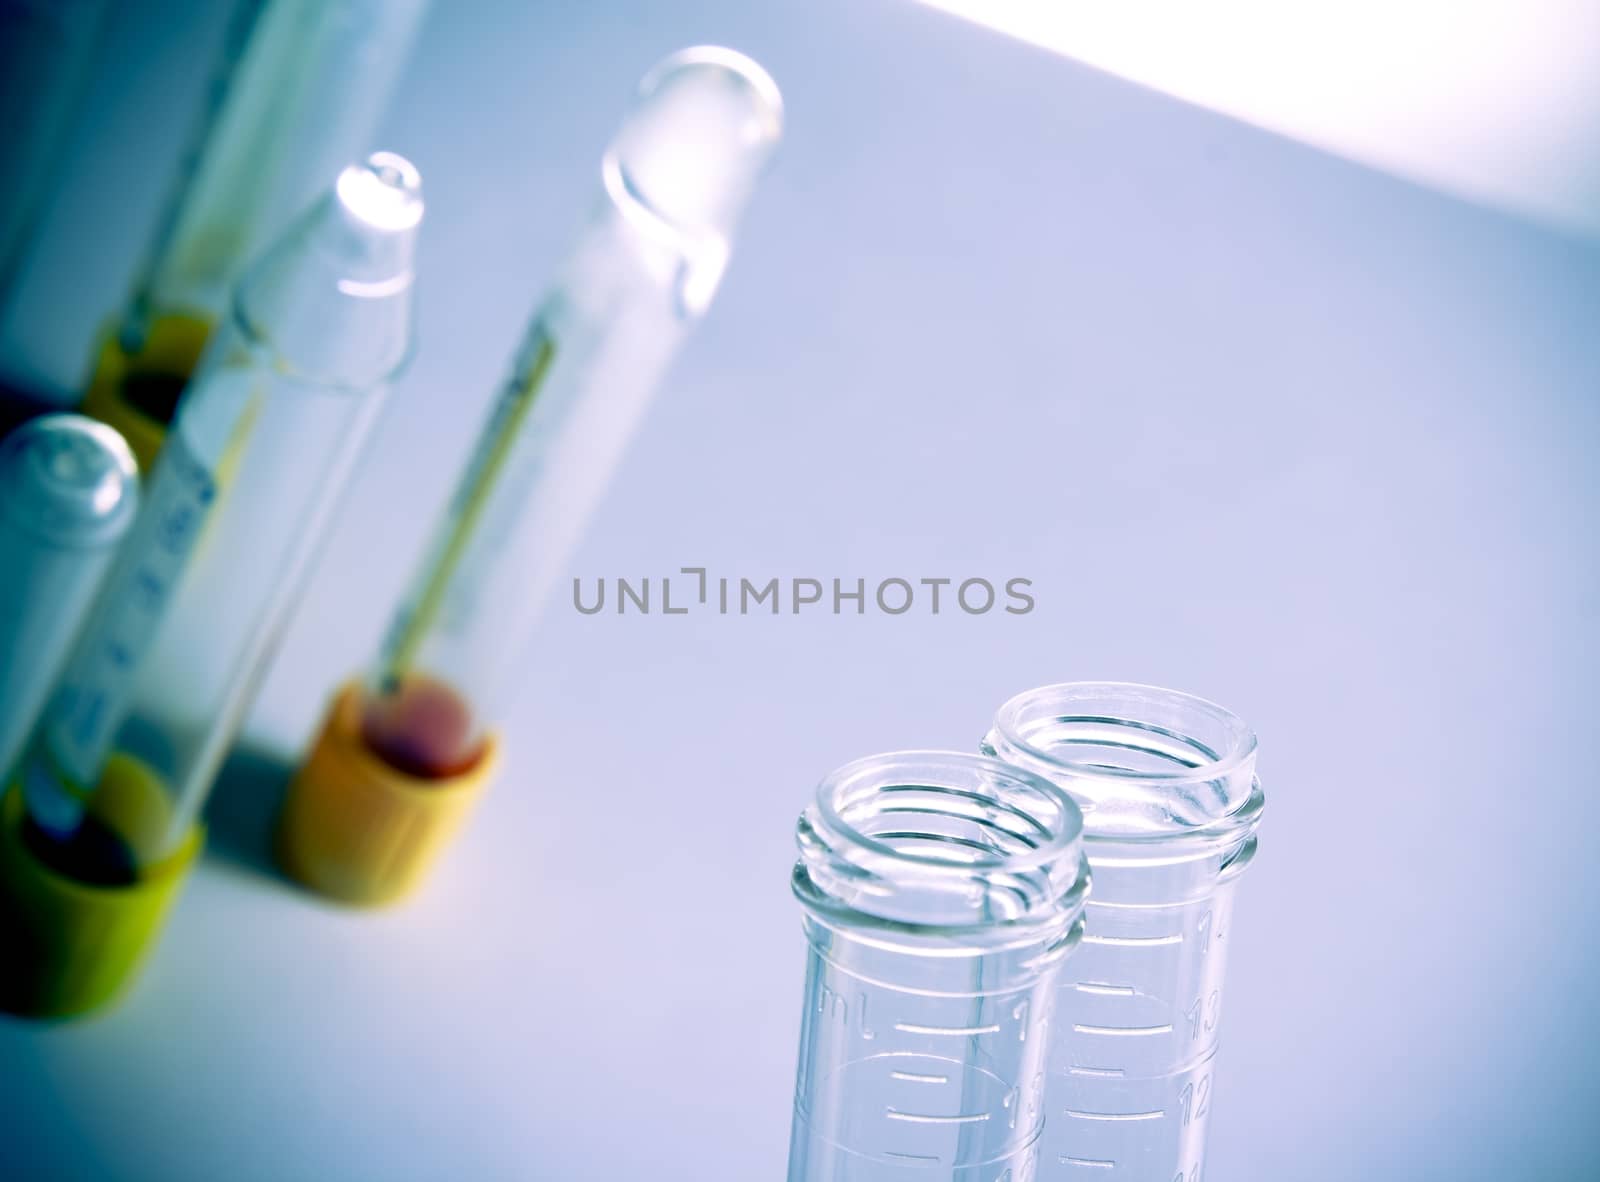 detail of test tubes in hospital laboratory on table with space for text